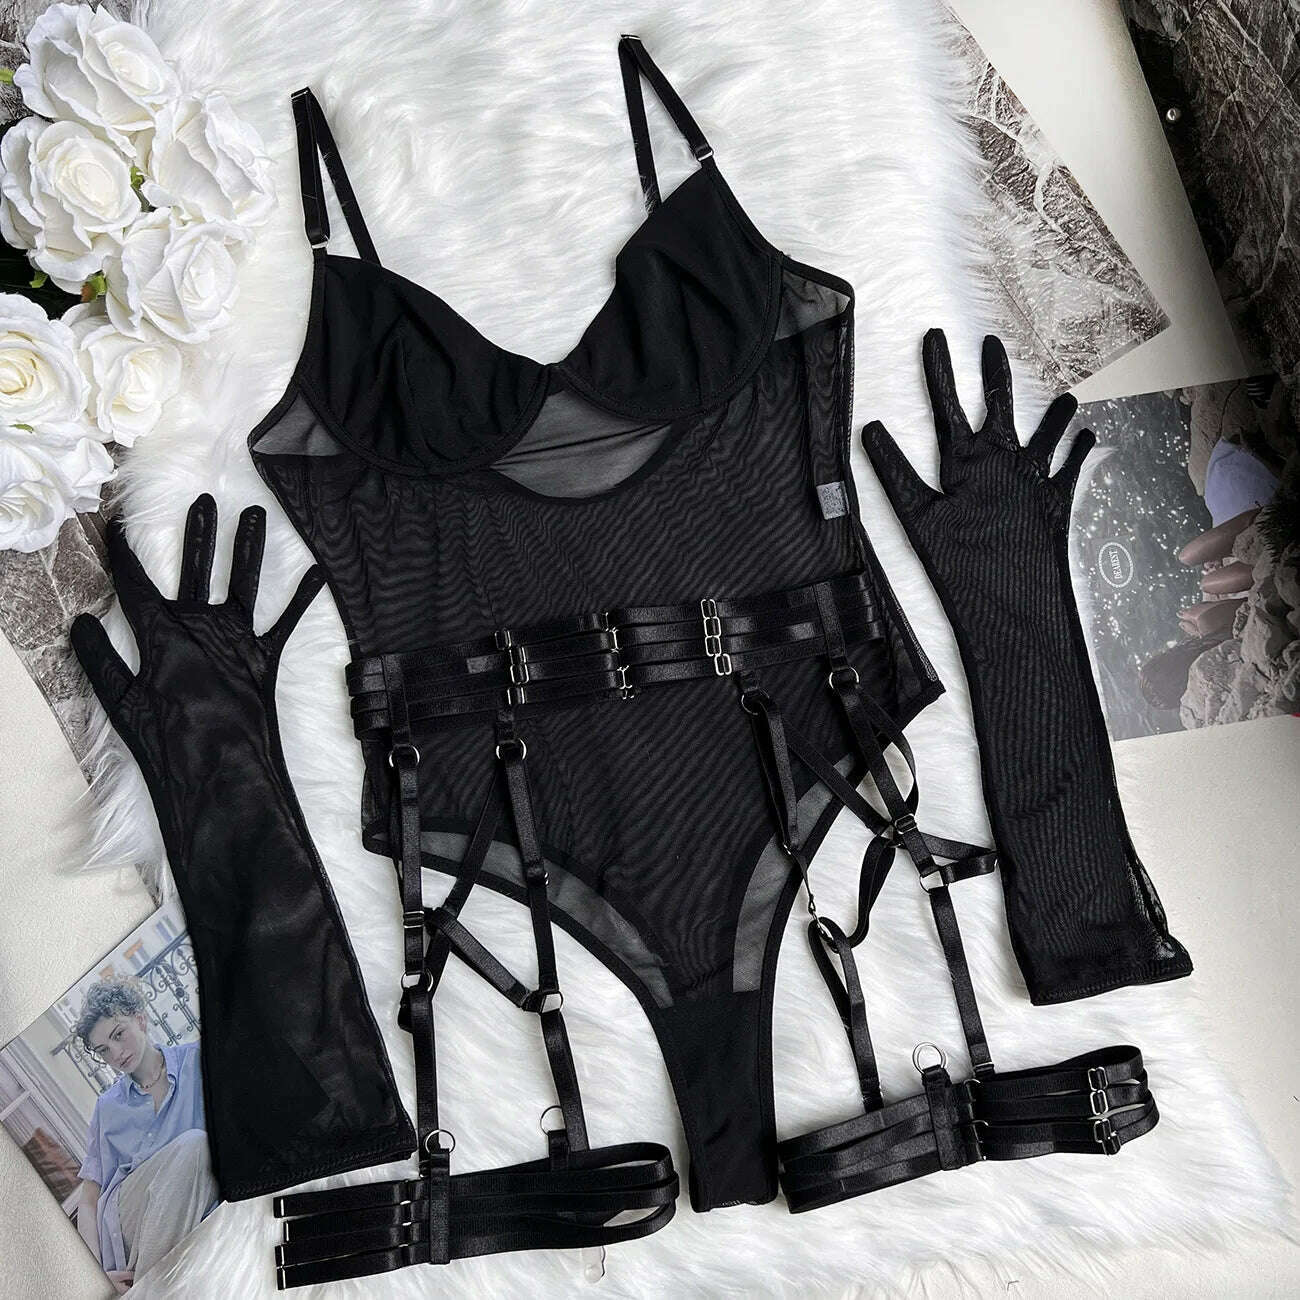 KIMLUD, Ellolace Tight Fitting Lace Bodysuit Sexy See Through Body With Gloves Garter Night Club Outfit Sissy Crotchless Mesh Top, KIMLUD Womens Clothes